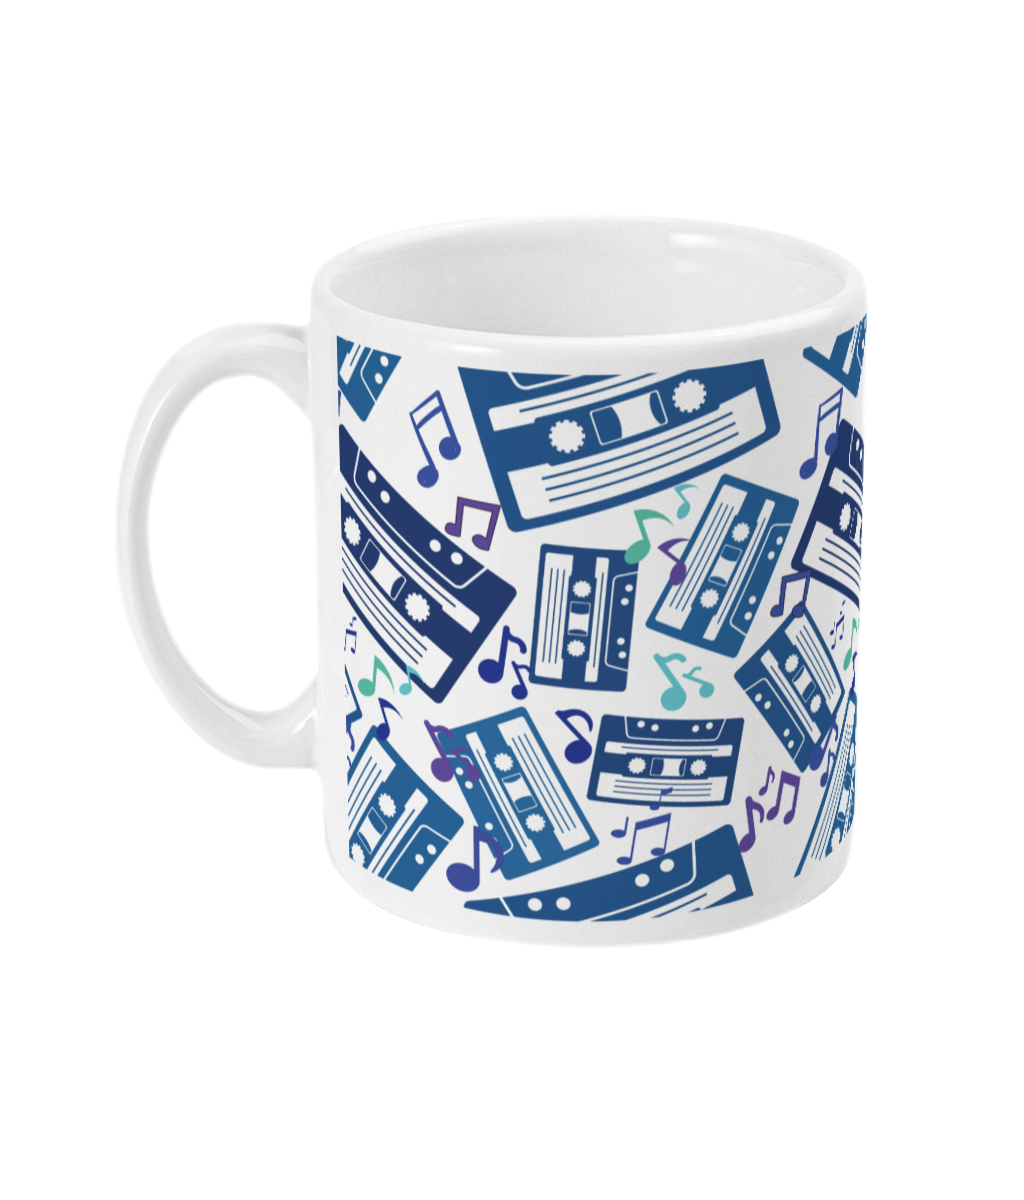 White mug with blue toned and purple music notes and cassette tapes spread out at different angles in different shades of blue around the sides and front.